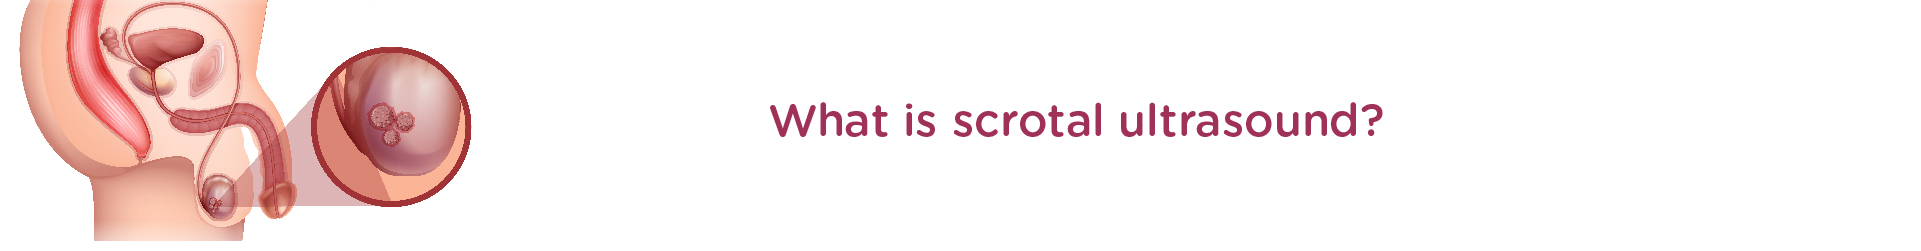 What is Scrotal Ultrasound?